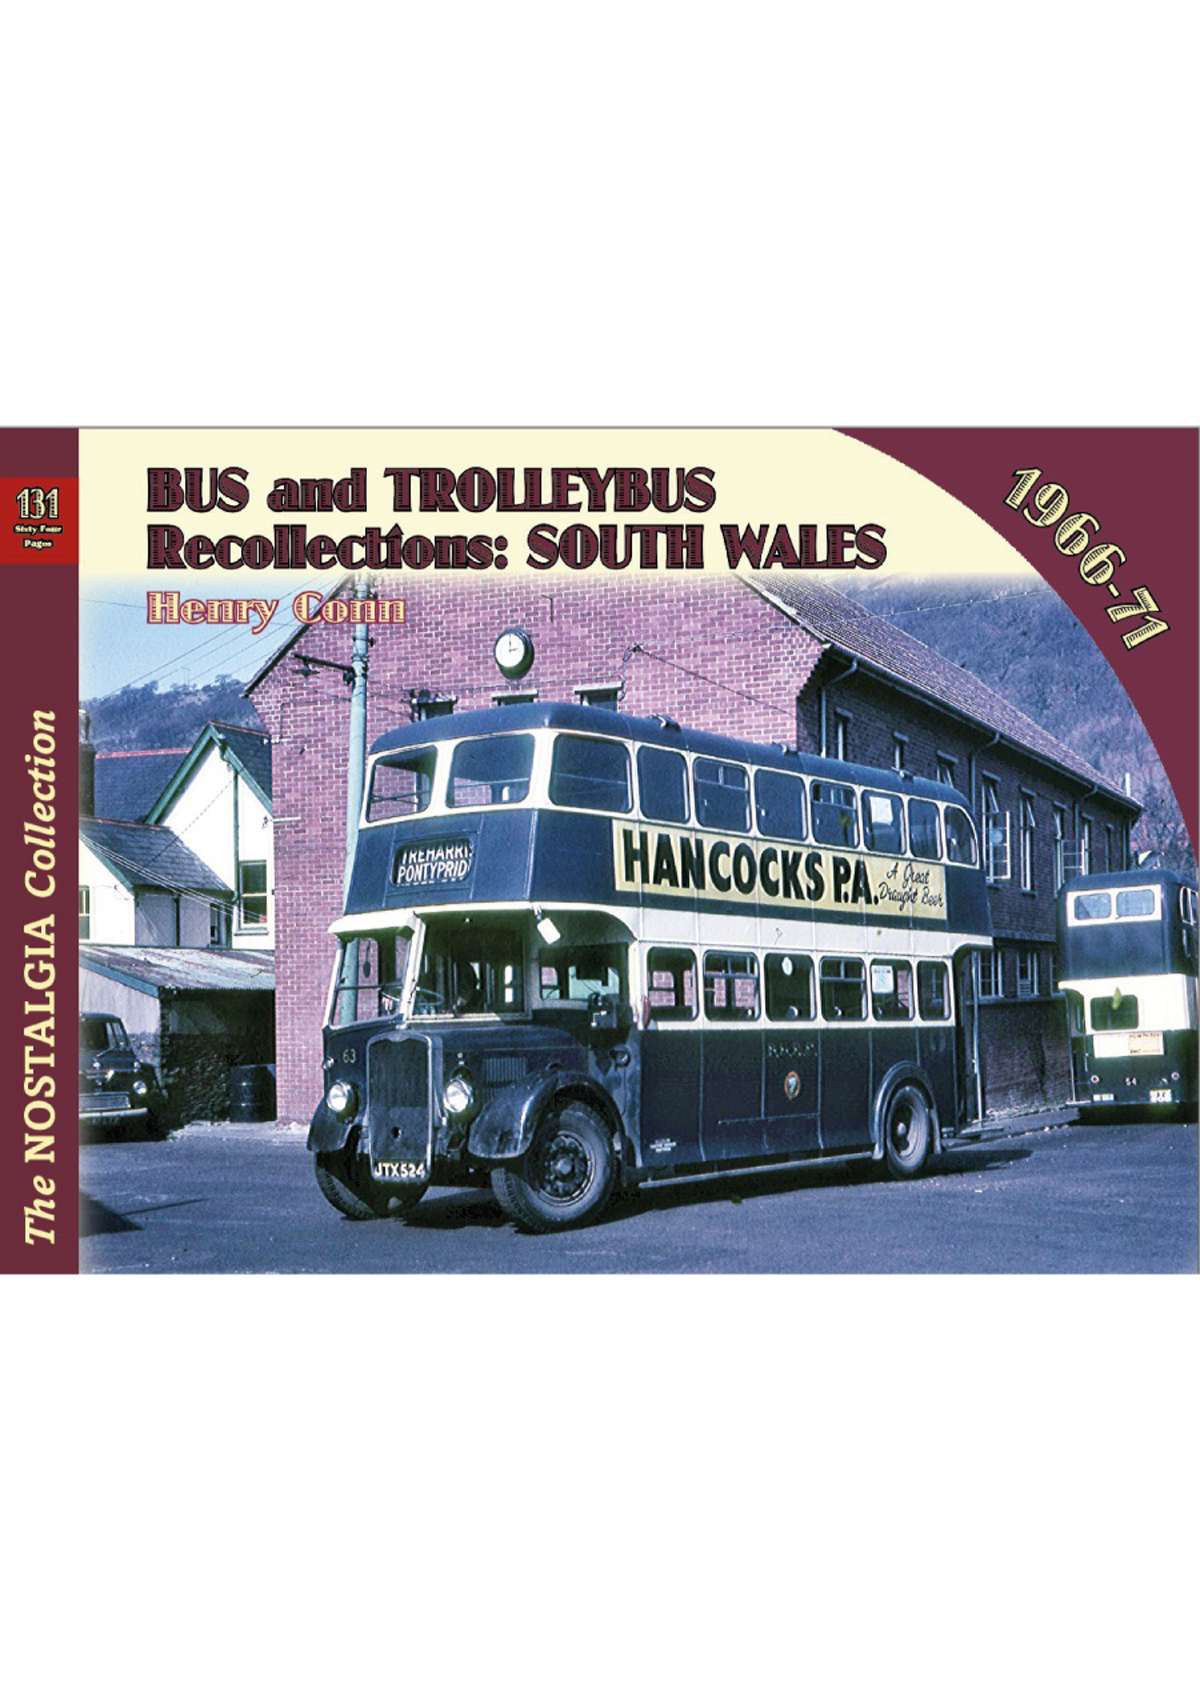 No 131 Bus and Trolleybus Recollections: South Wales